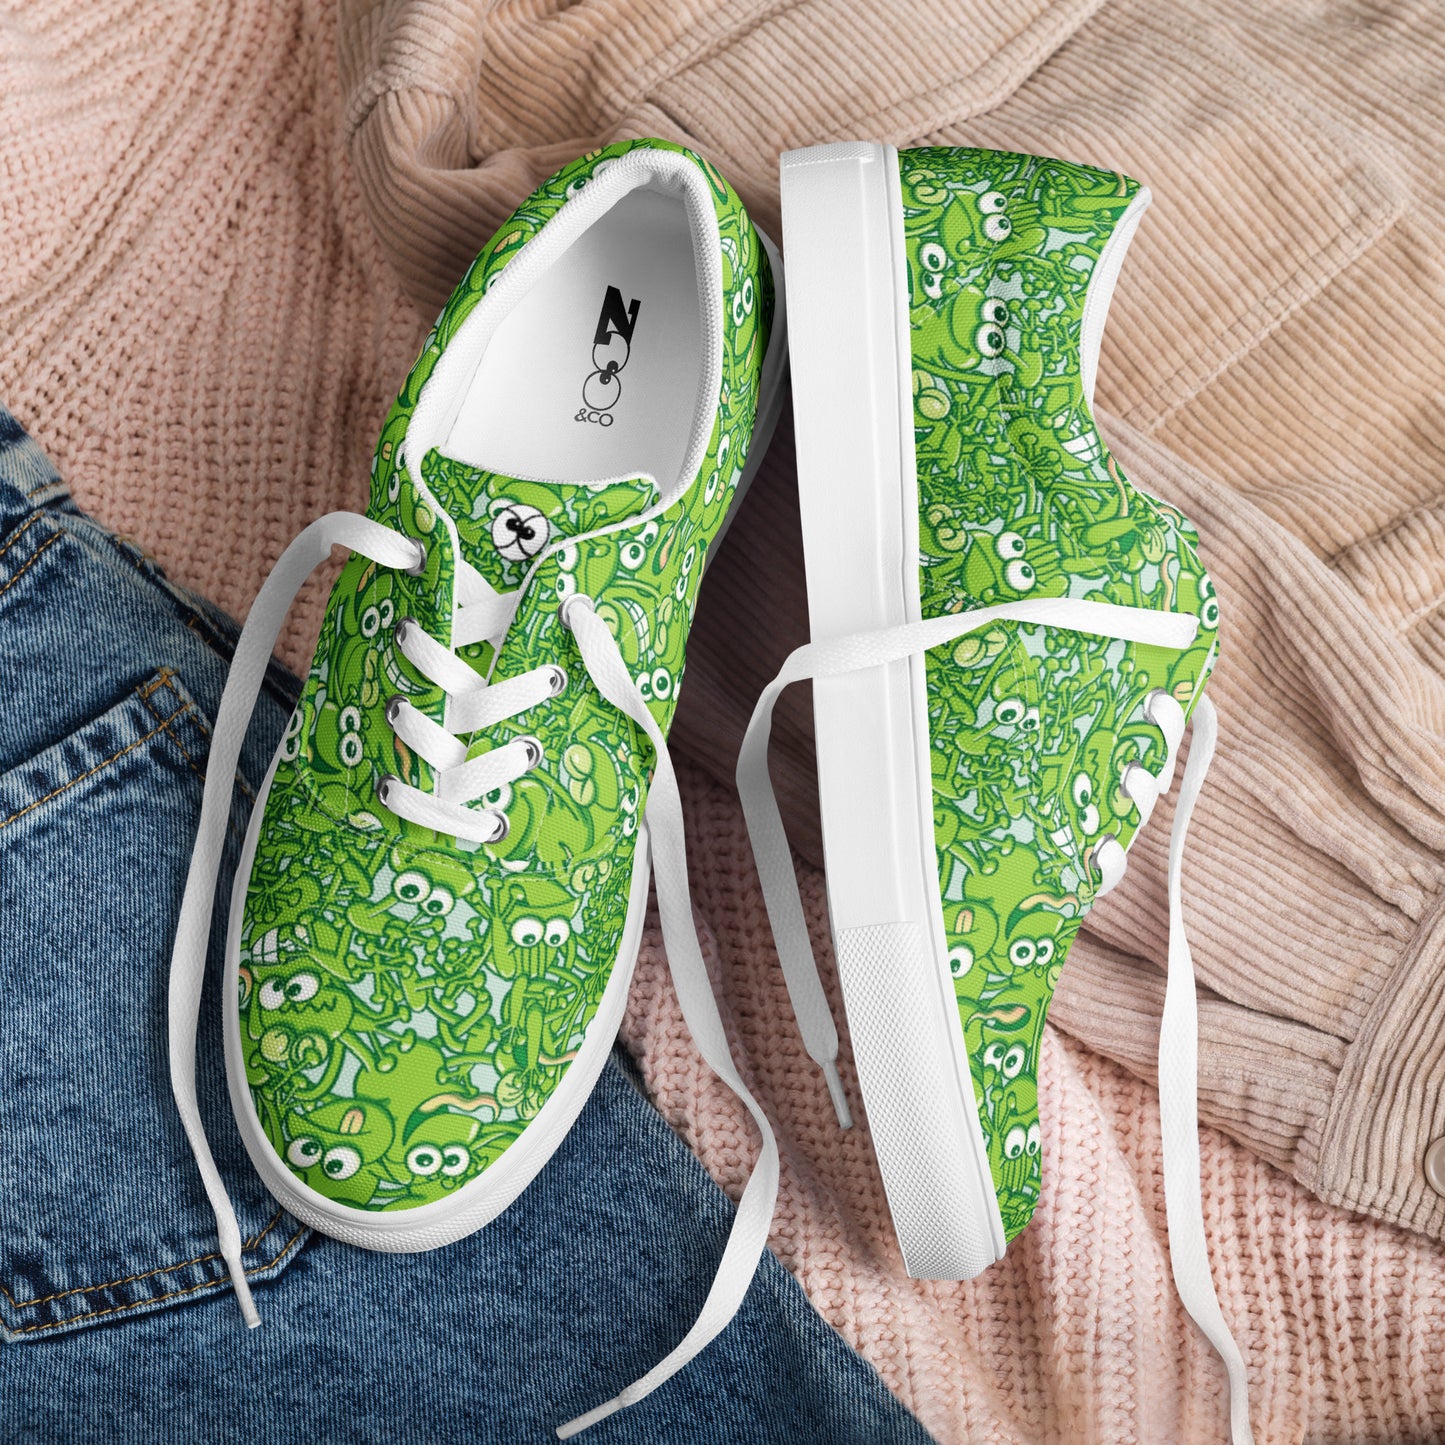 A tangled army of happy green frogs appears when the rain stops Women’s lace-up canvas shoes. Lifestyle